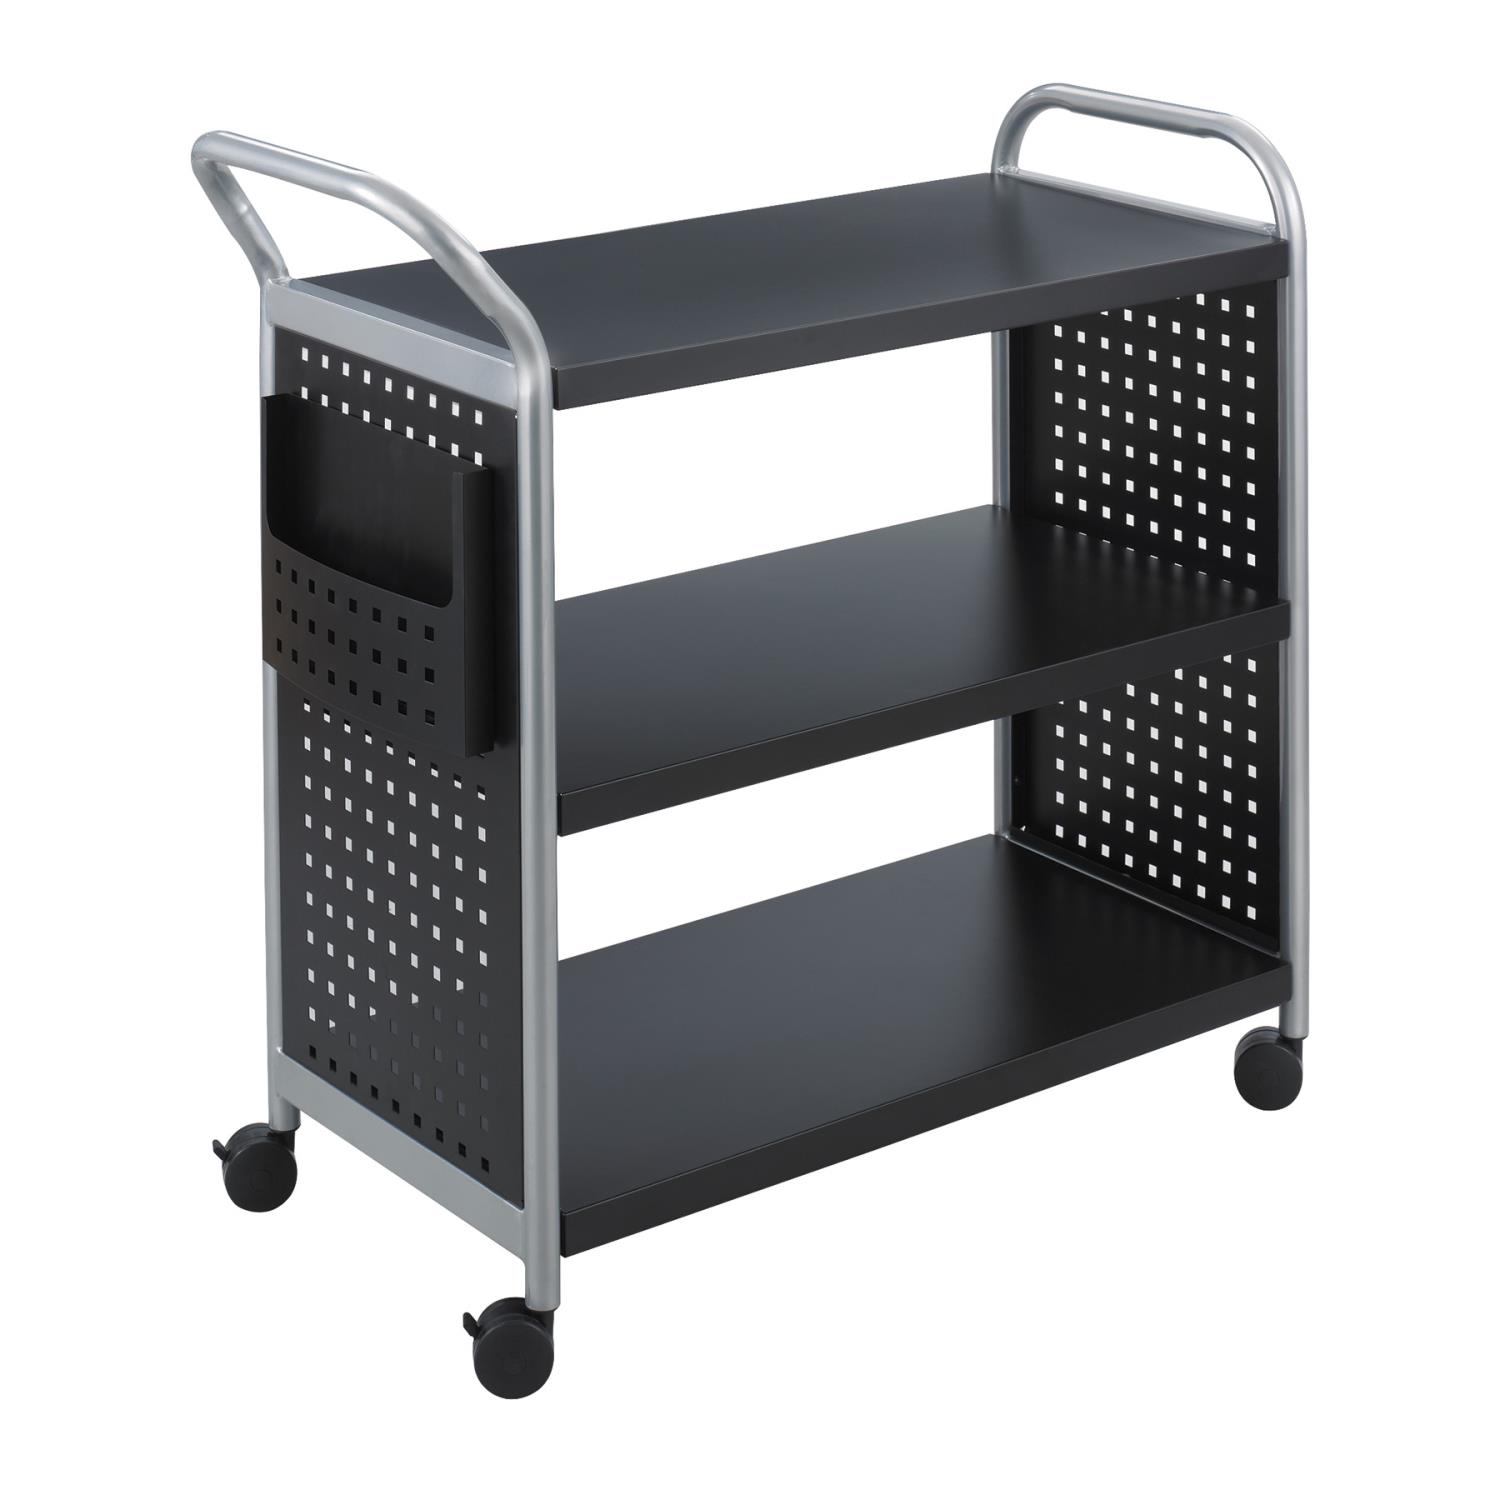 Safco Products 5339BL Scoot Steel Utility Cart, 3 Shelf, Silver/Black